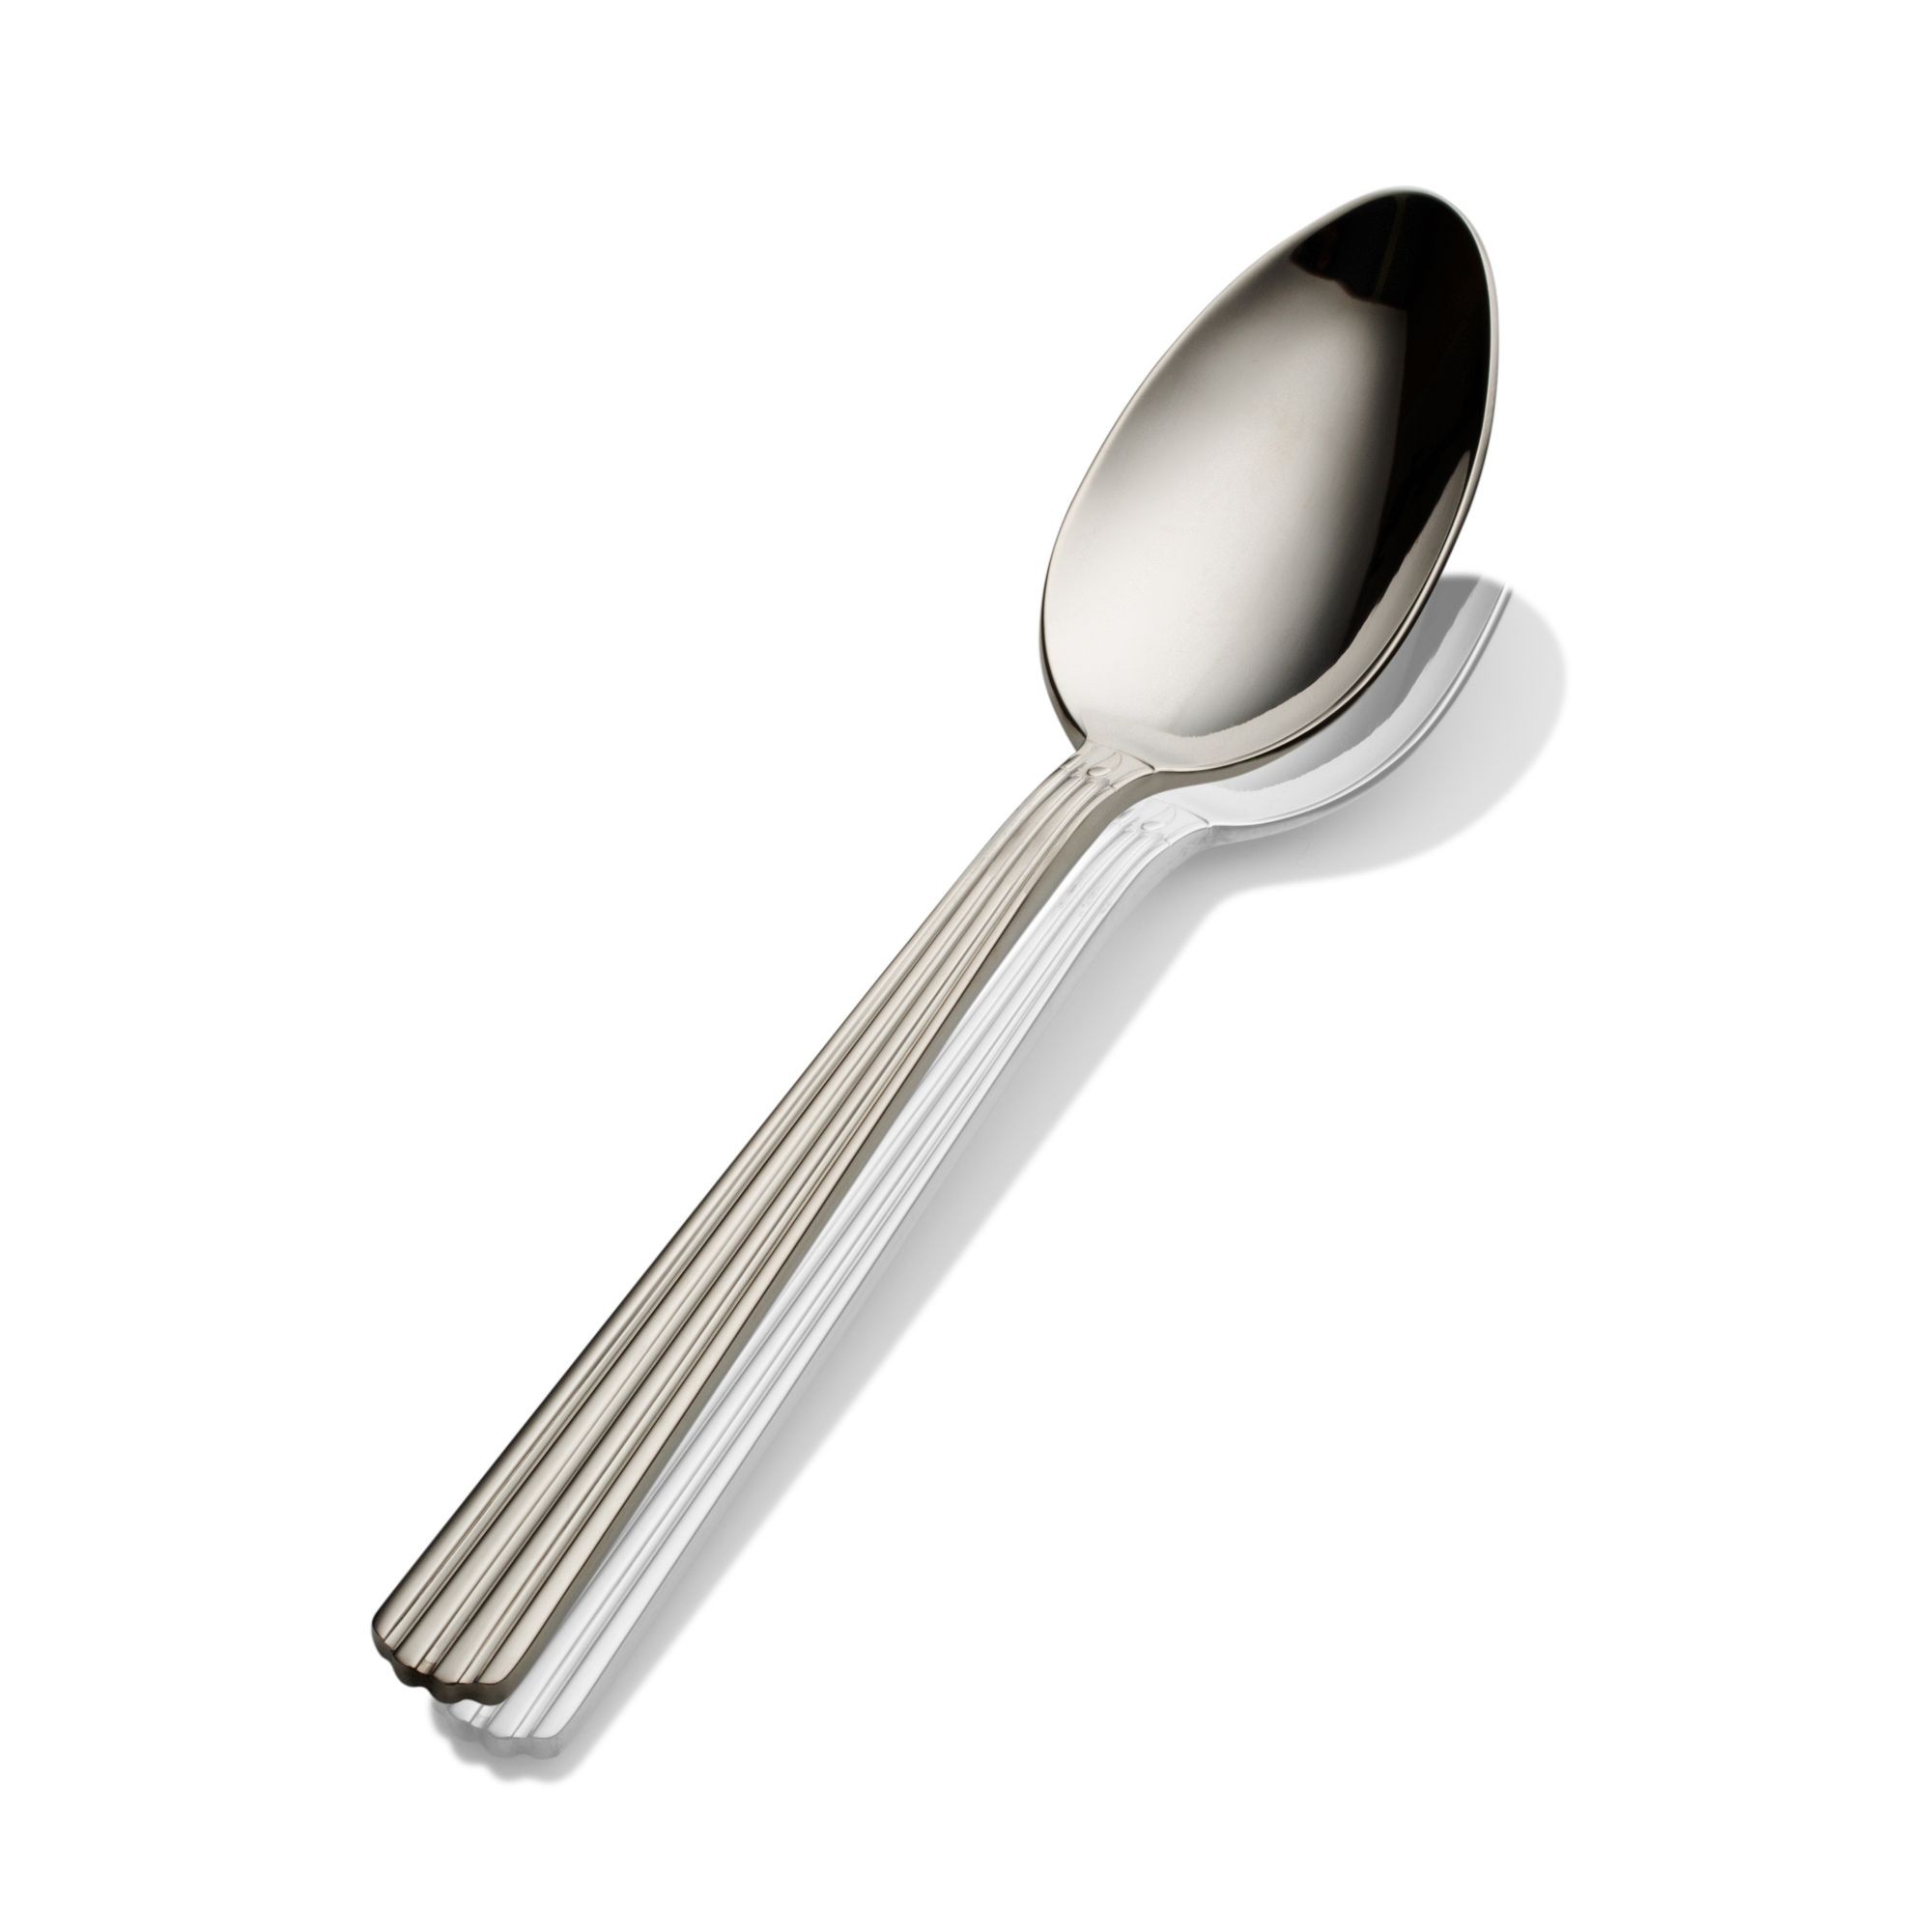 Bon Chef S1603 Britany 18/8 Stainless Steel Soup and Dessert Spoon